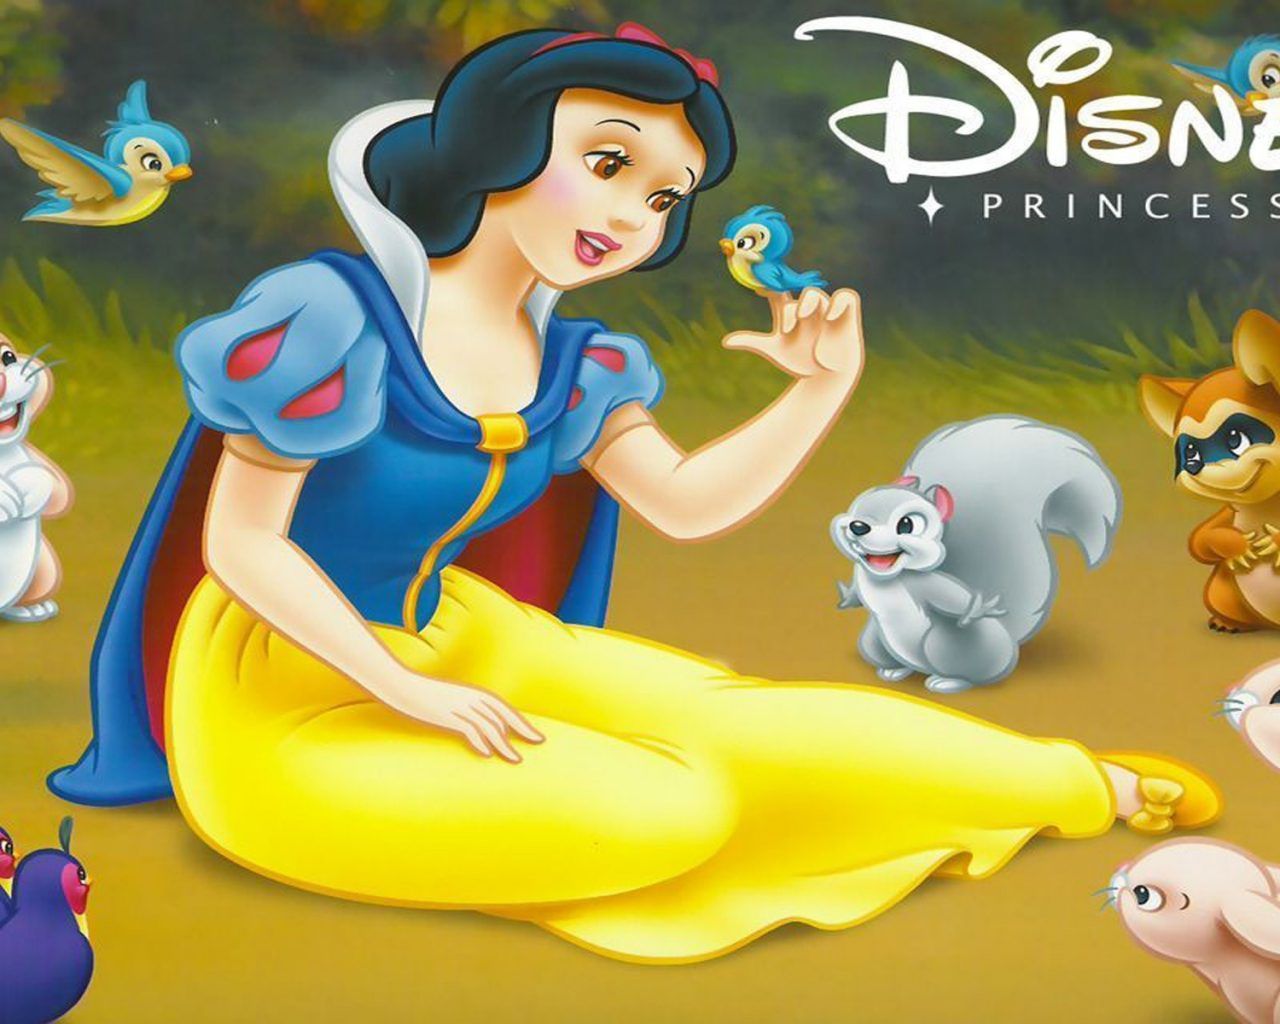 Friends Of Disney Princess Snow White Collection Of Picture Wallpaper HD 1920x1200, Wallpaper13.com